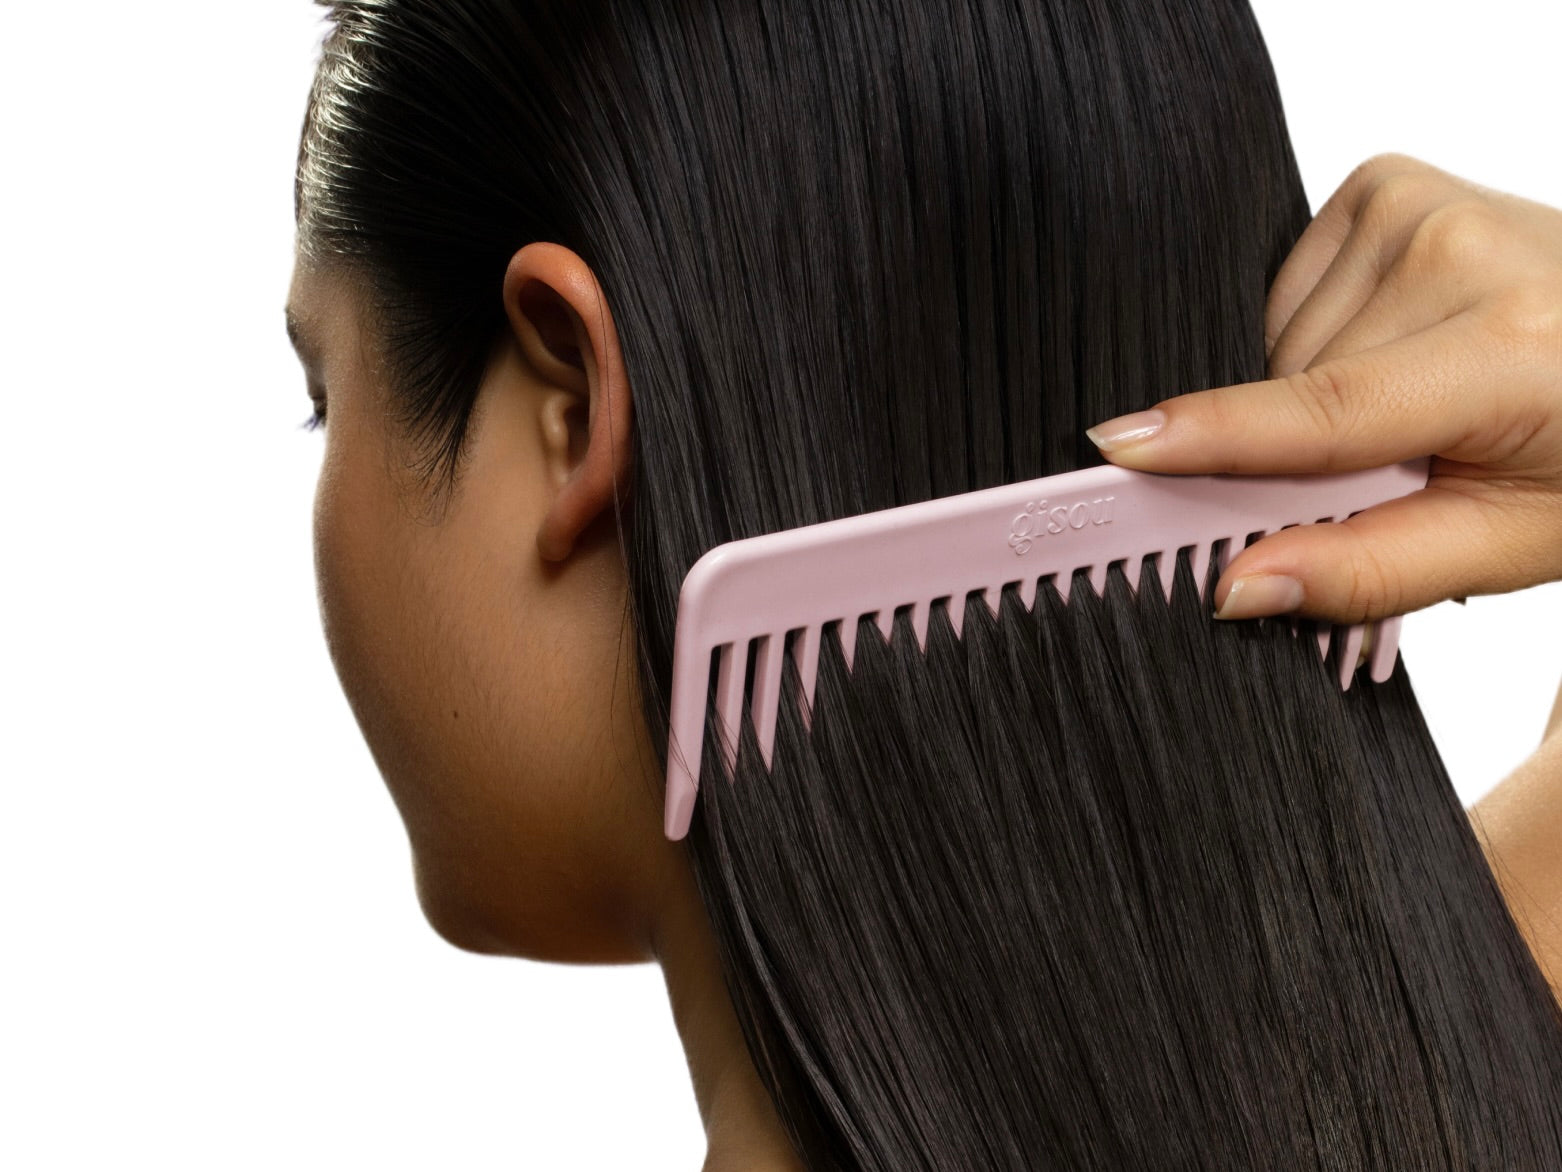 How to Keep Hair From Tangling